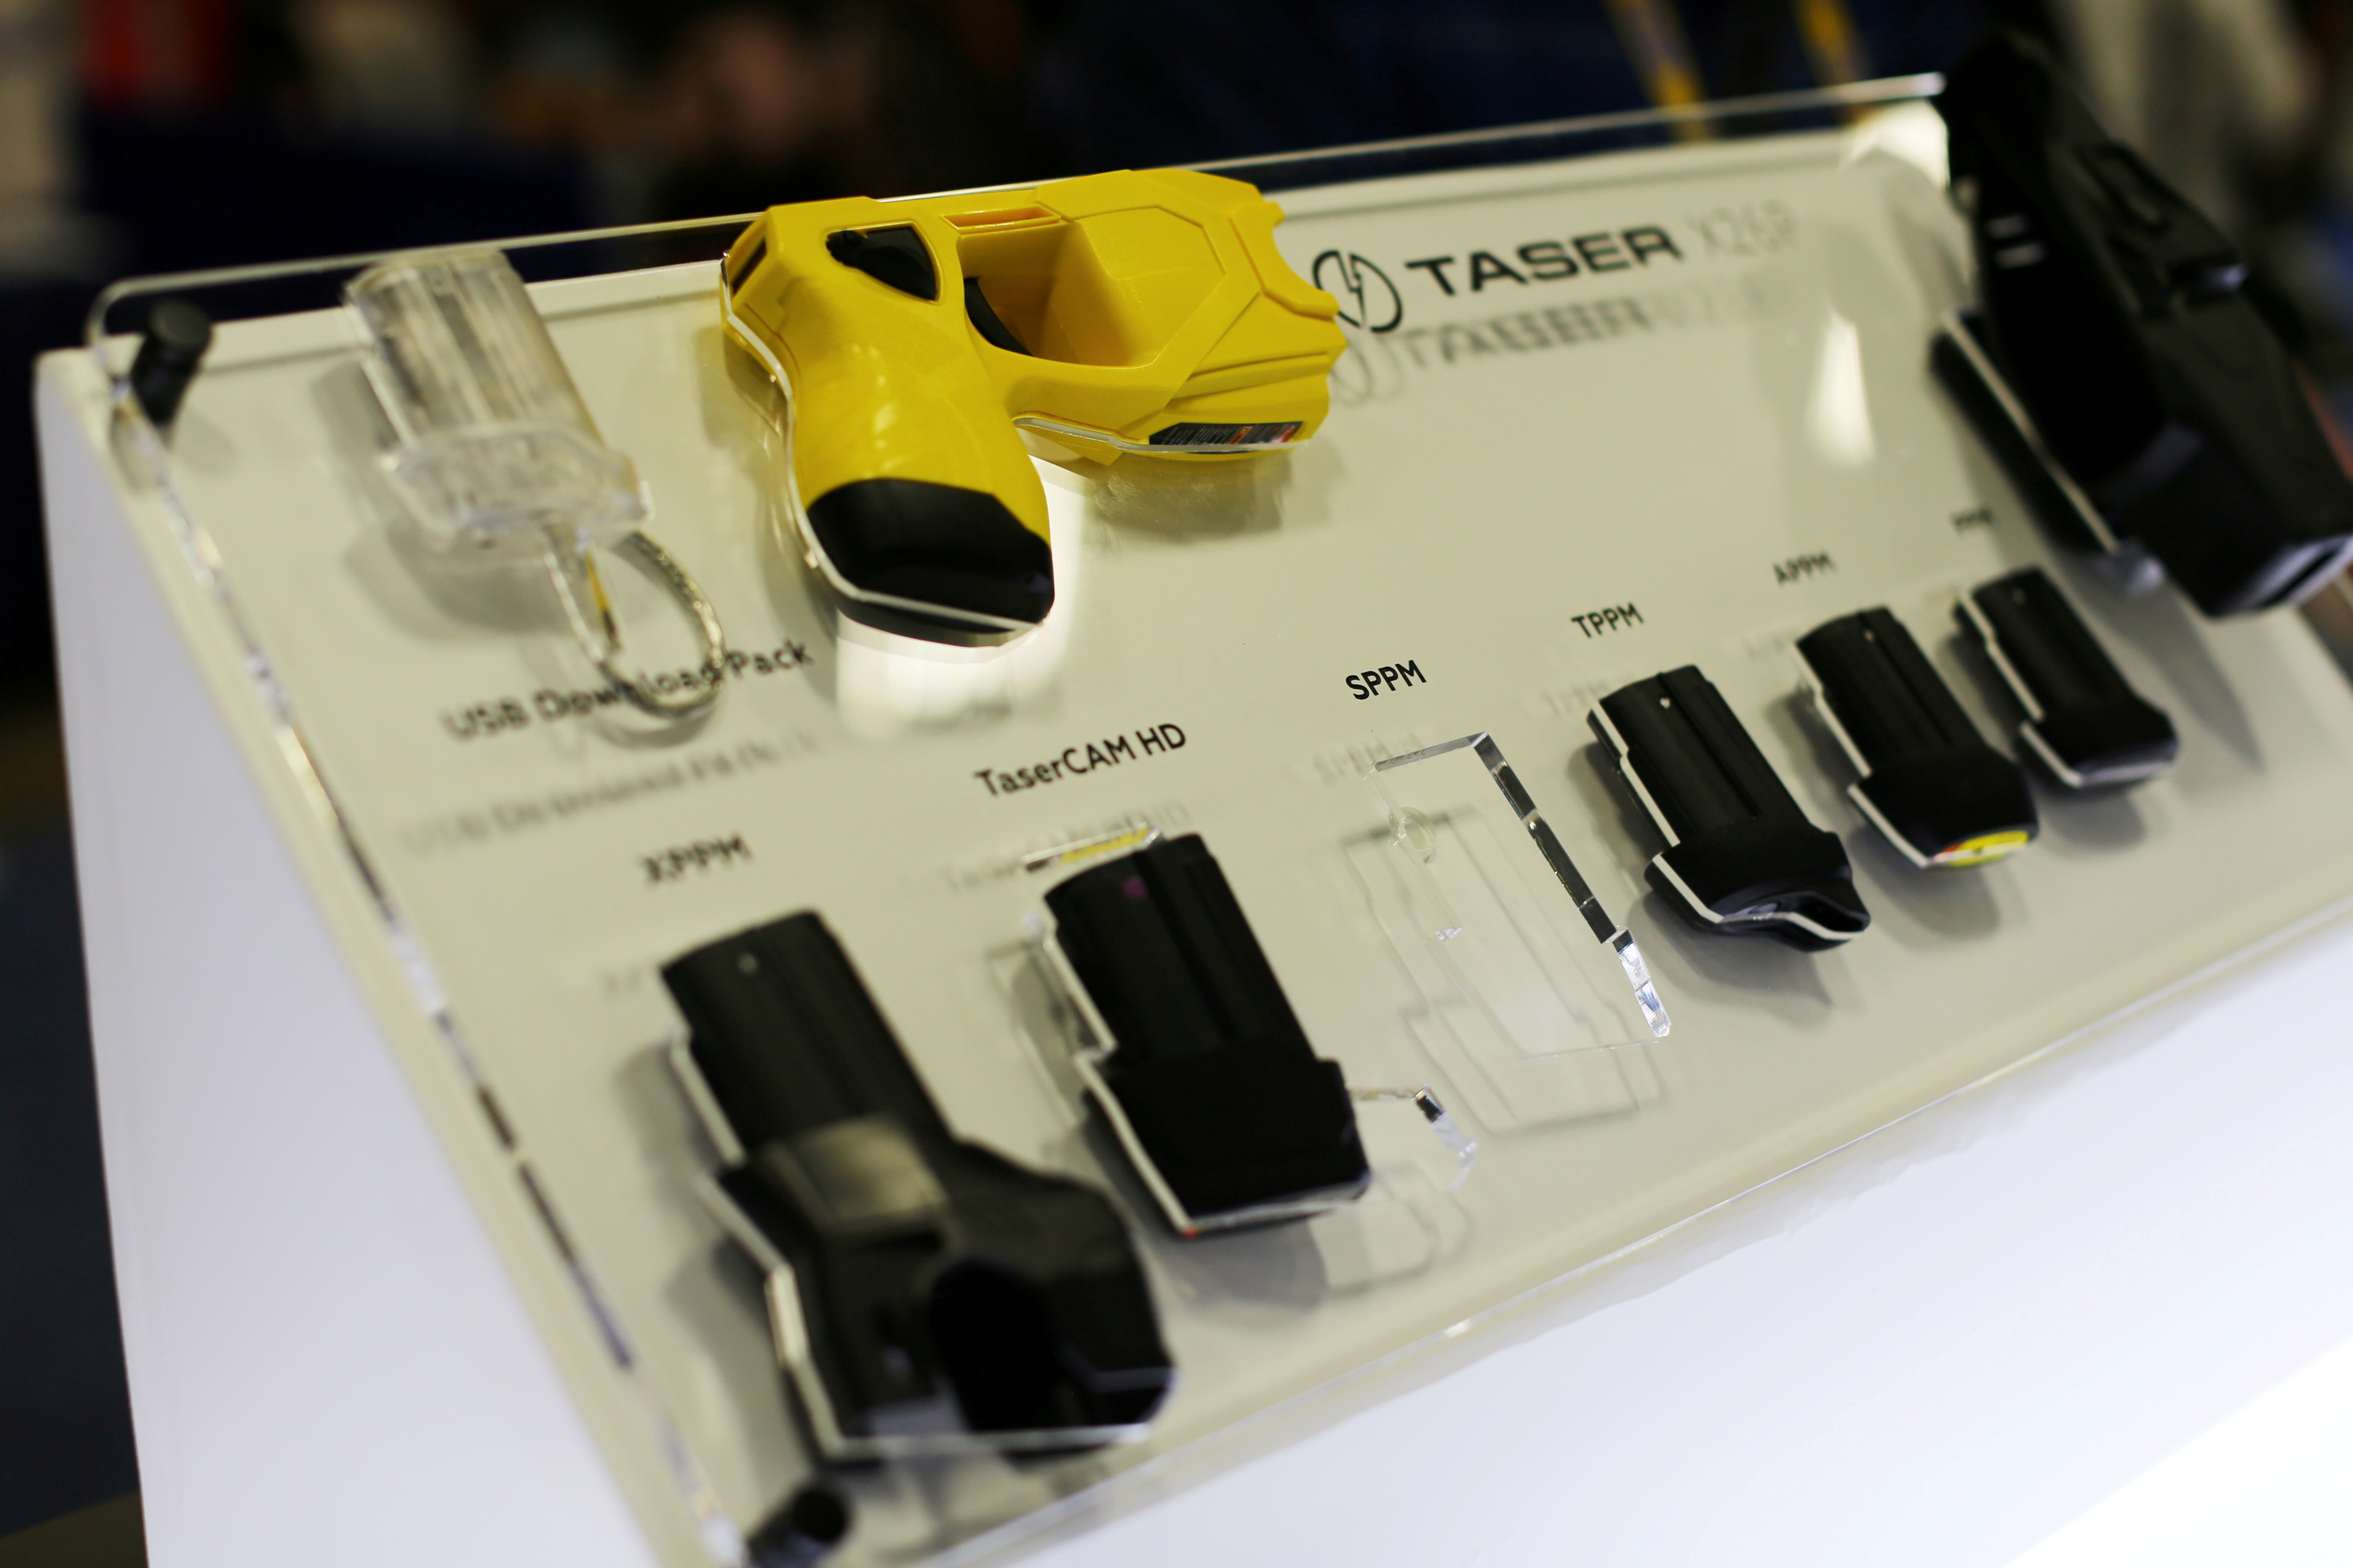 An X26P Taser gun is shown on display at the Taser booth during the International Association of Chiefs of Police conference in San Diego